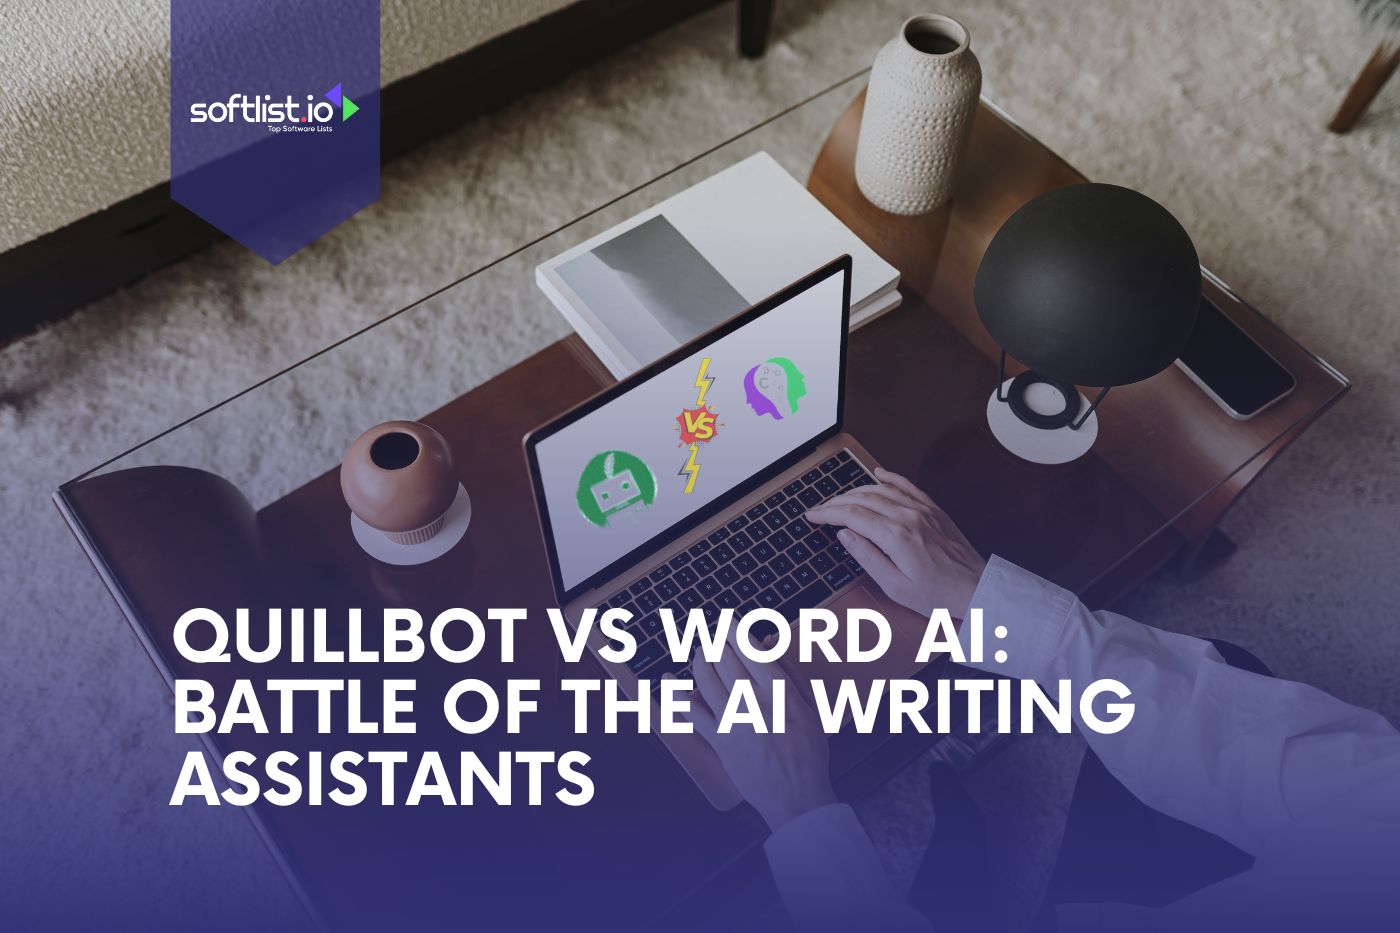 Quillbot vs Word AI Battle of the AI Writing Assistants